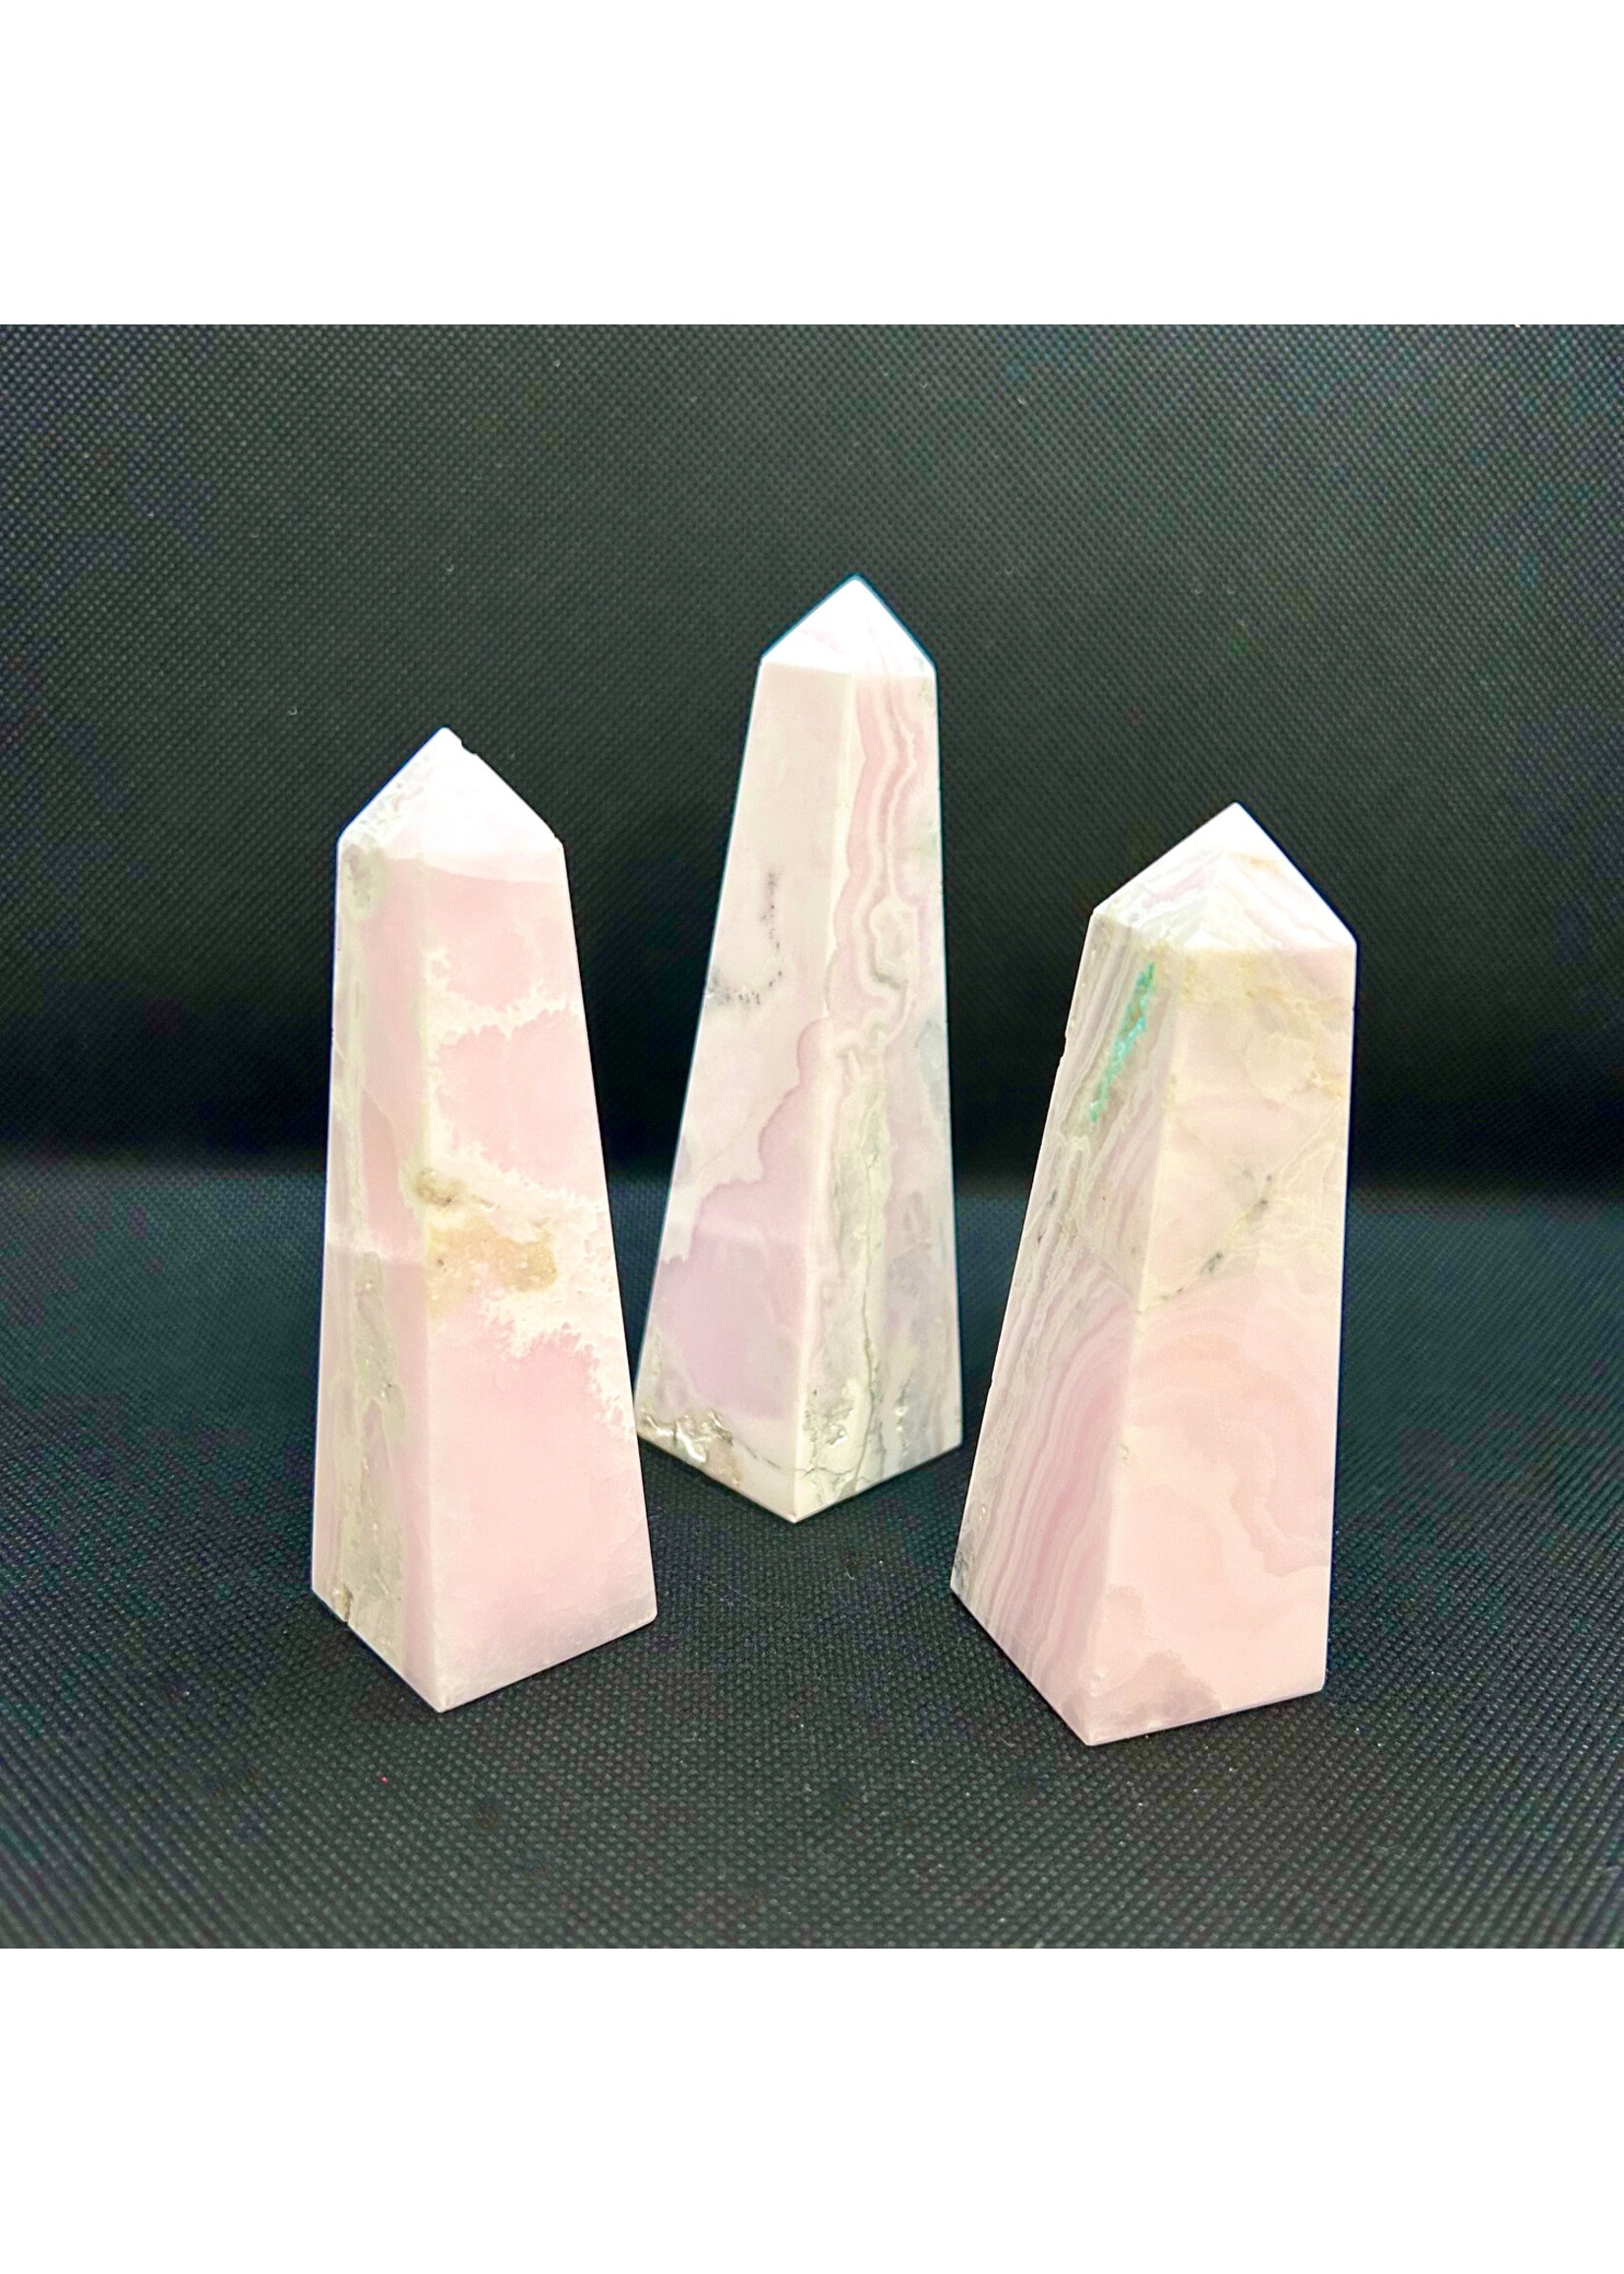 Mangano Calcite Obelisks for elevated love and compassion